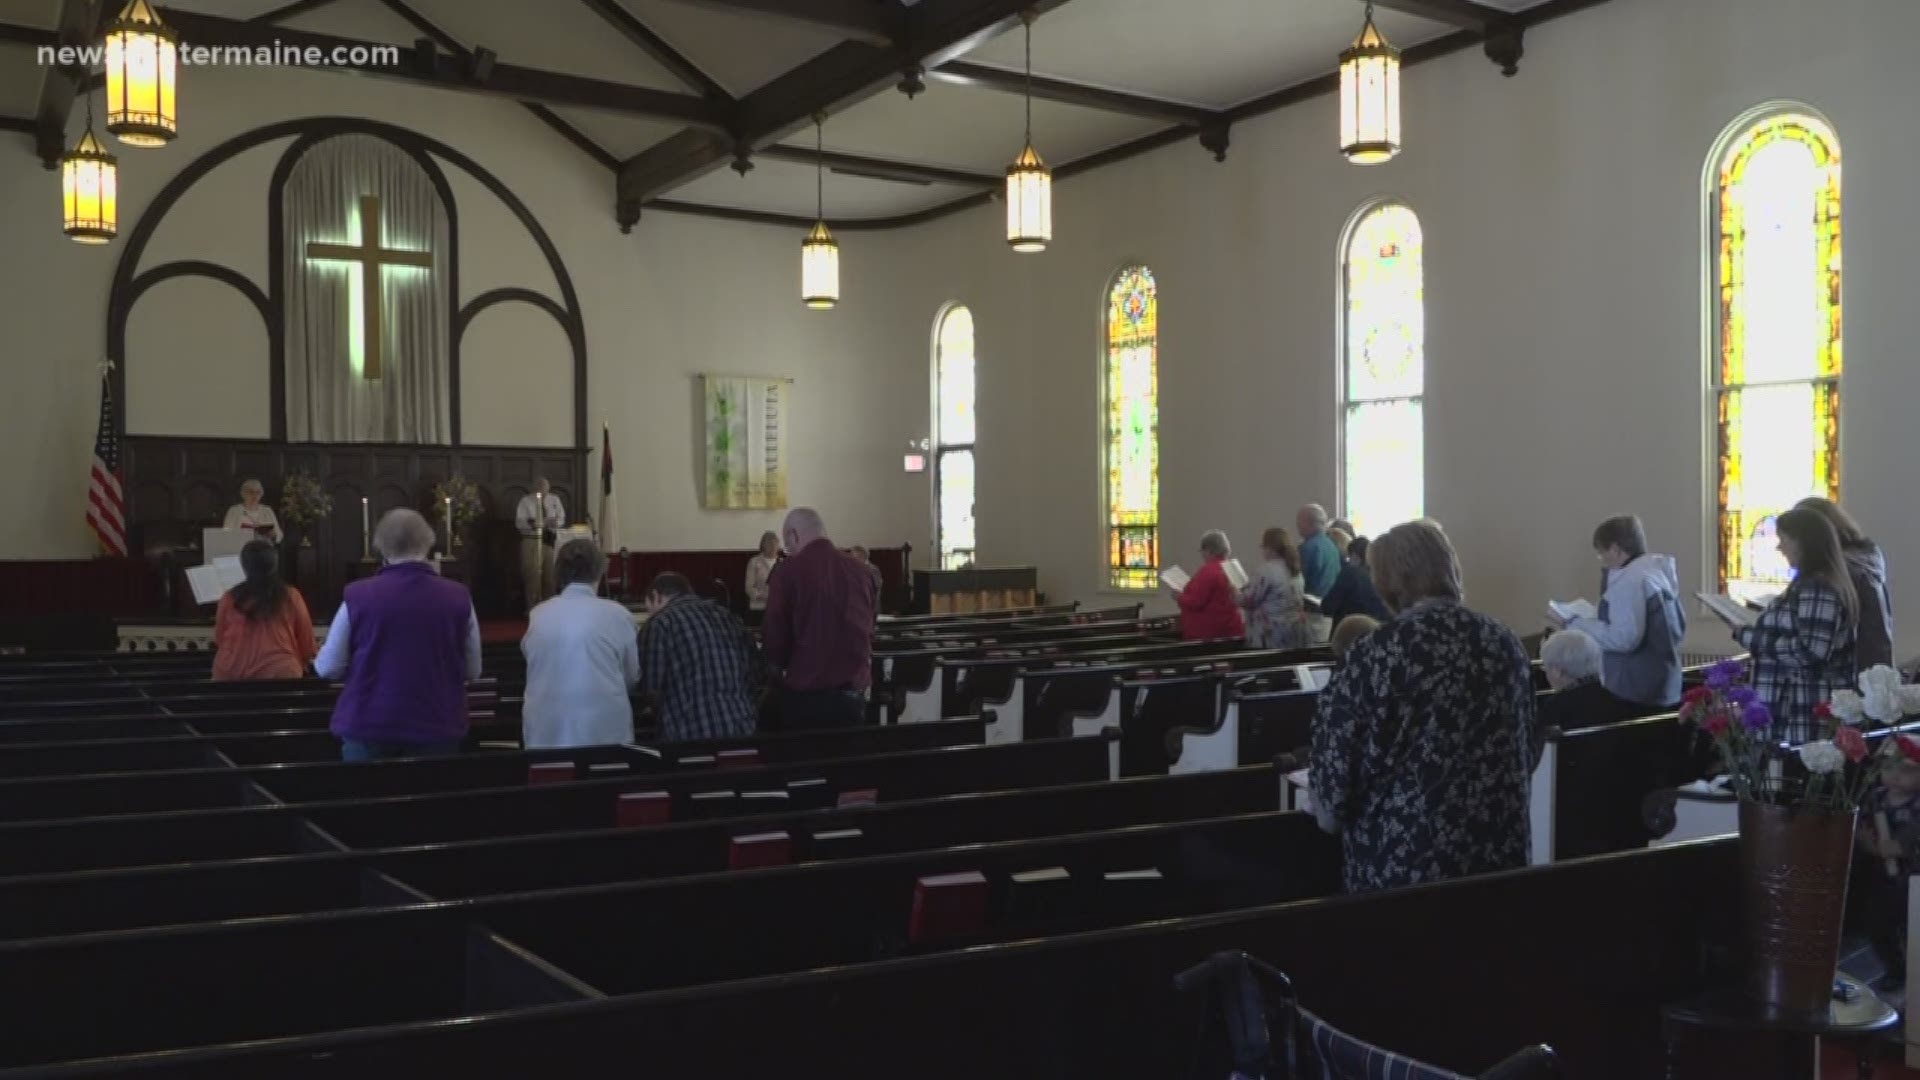 165 year old church is soon to close in Bangor.